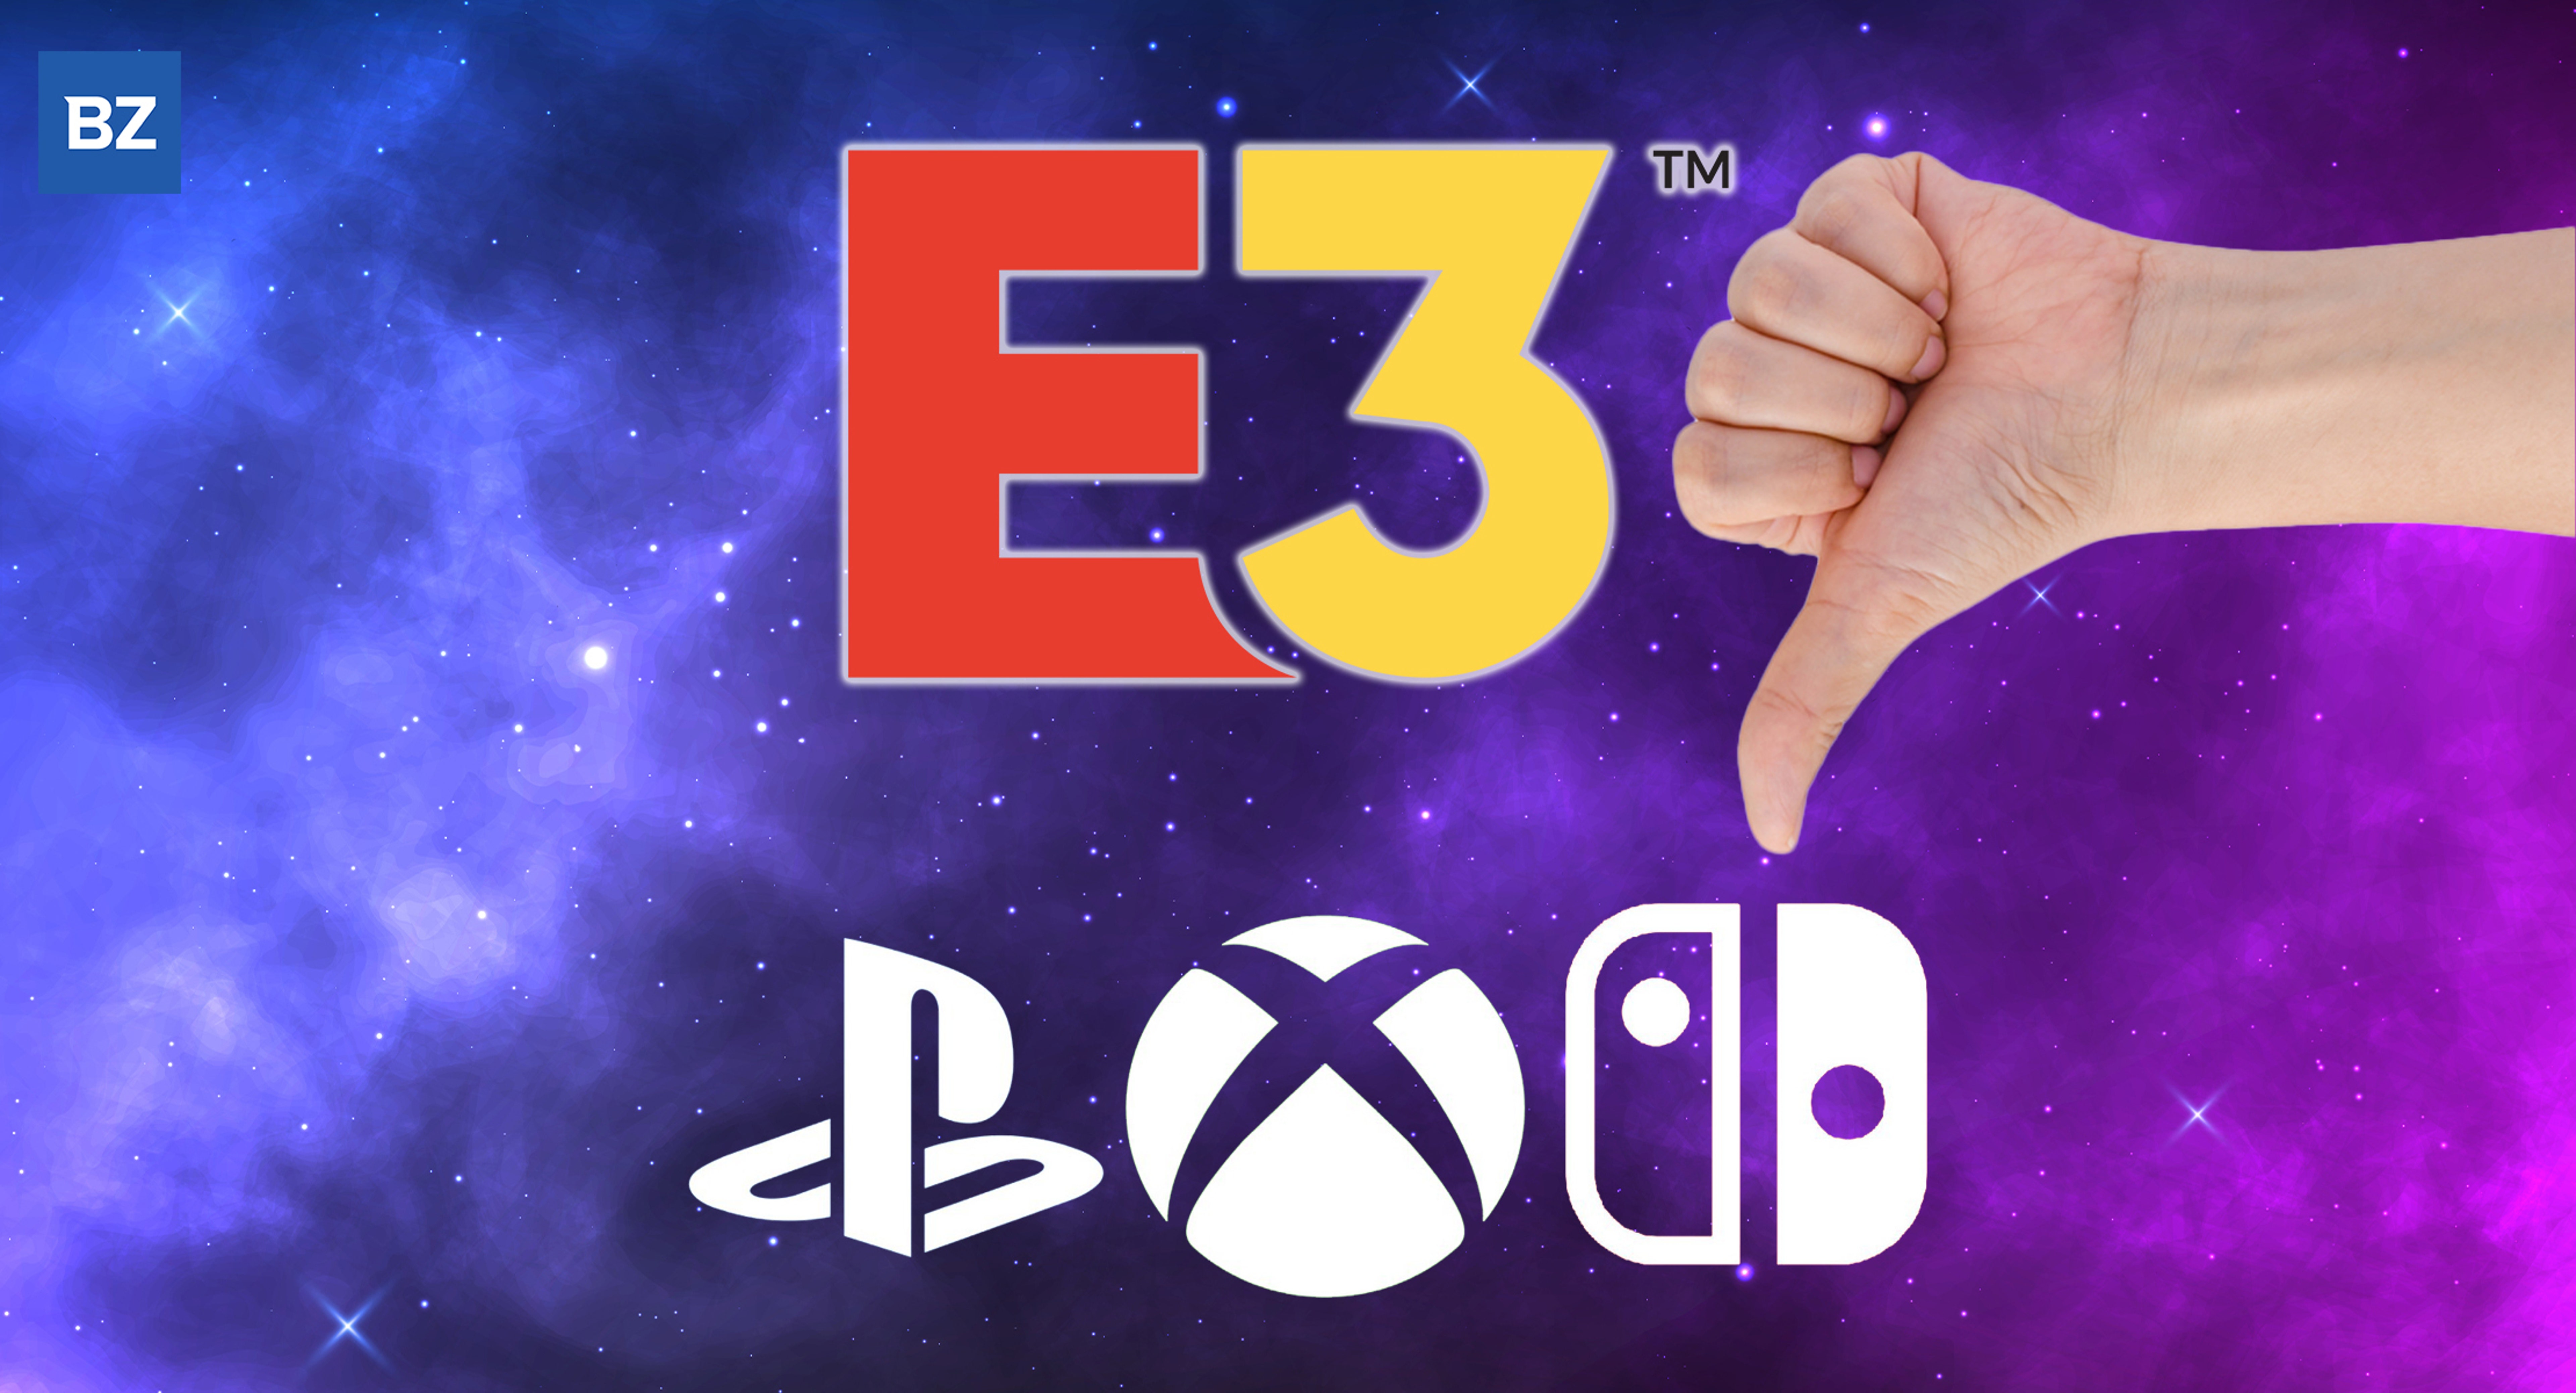 E3 2023 Takes Major Hit As Big 3 Pull Out: Microsoft, Sony, Nintendo Not Attending Electronic Entertainment Expo This Year